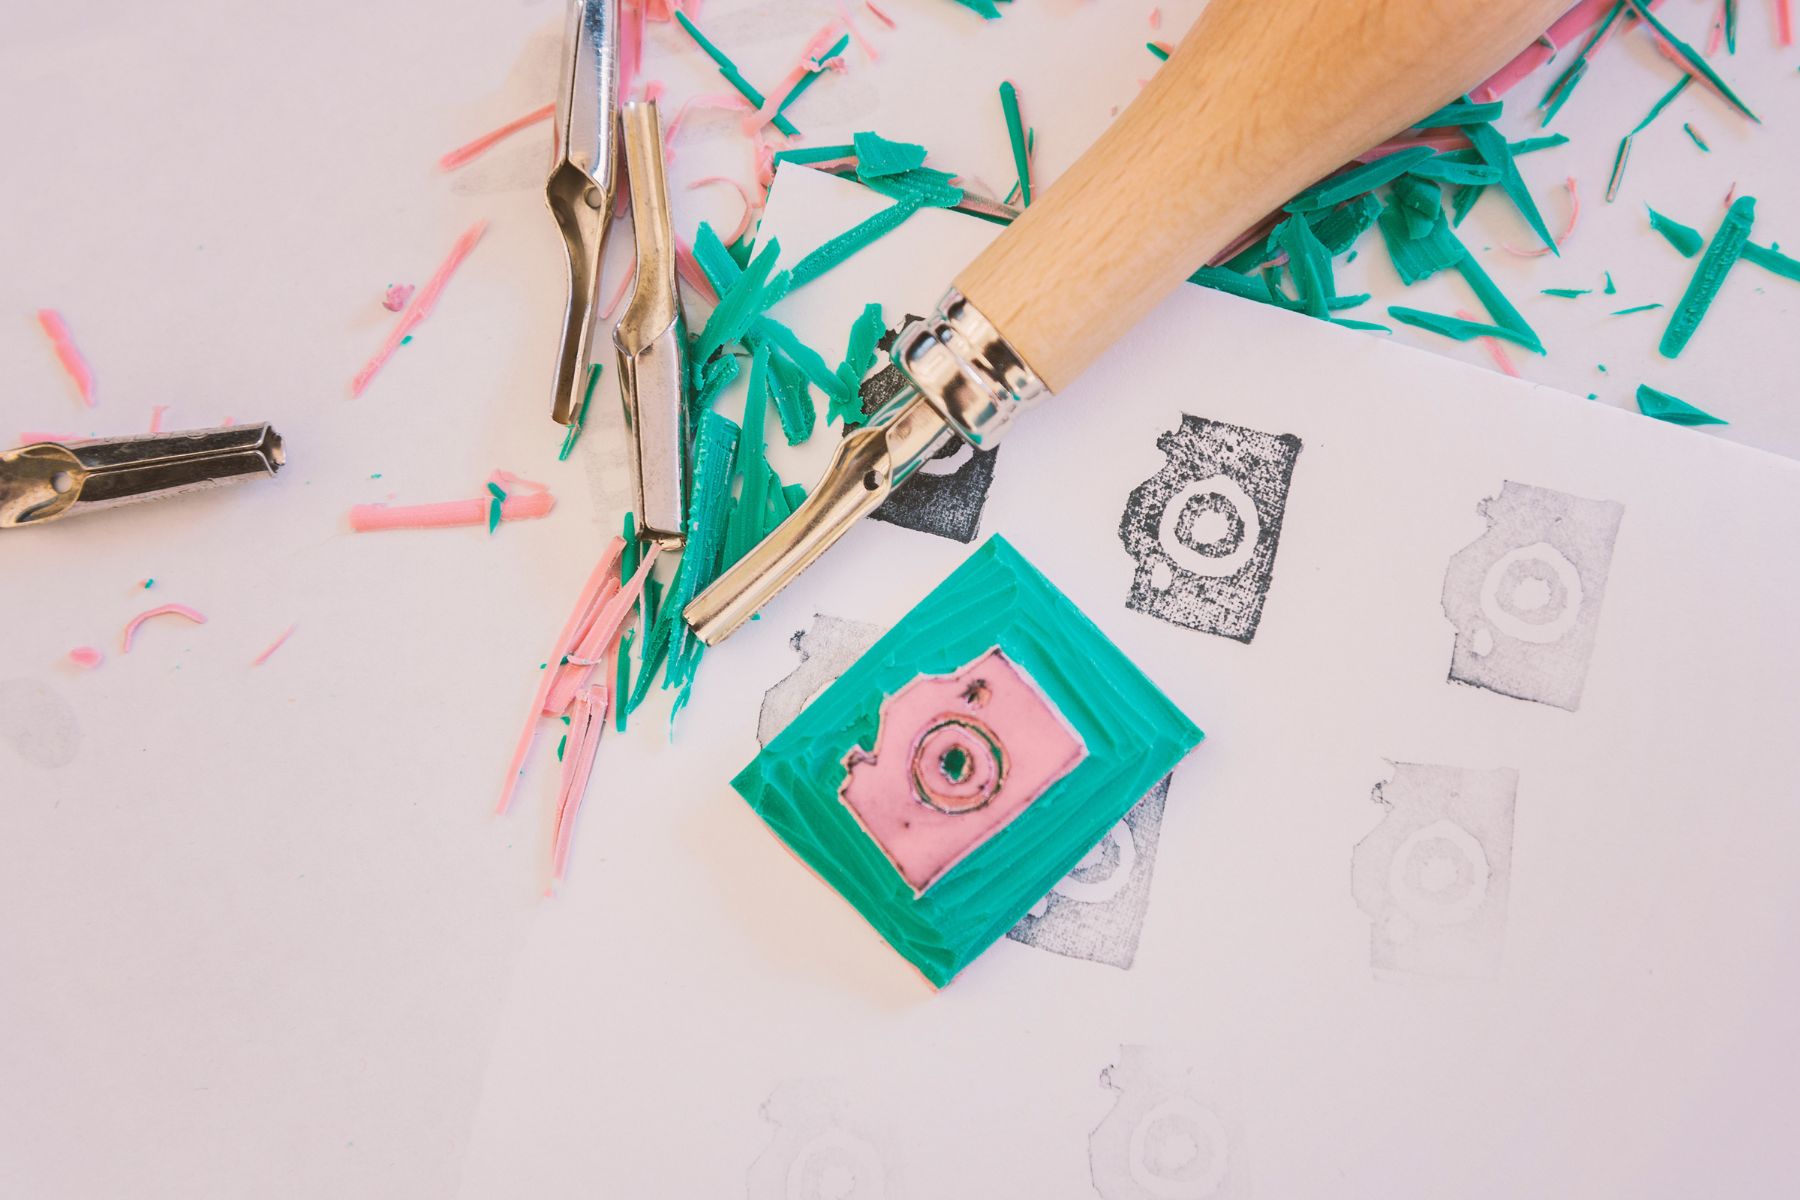 Best stamp making kits: Make your mark with customized stamps